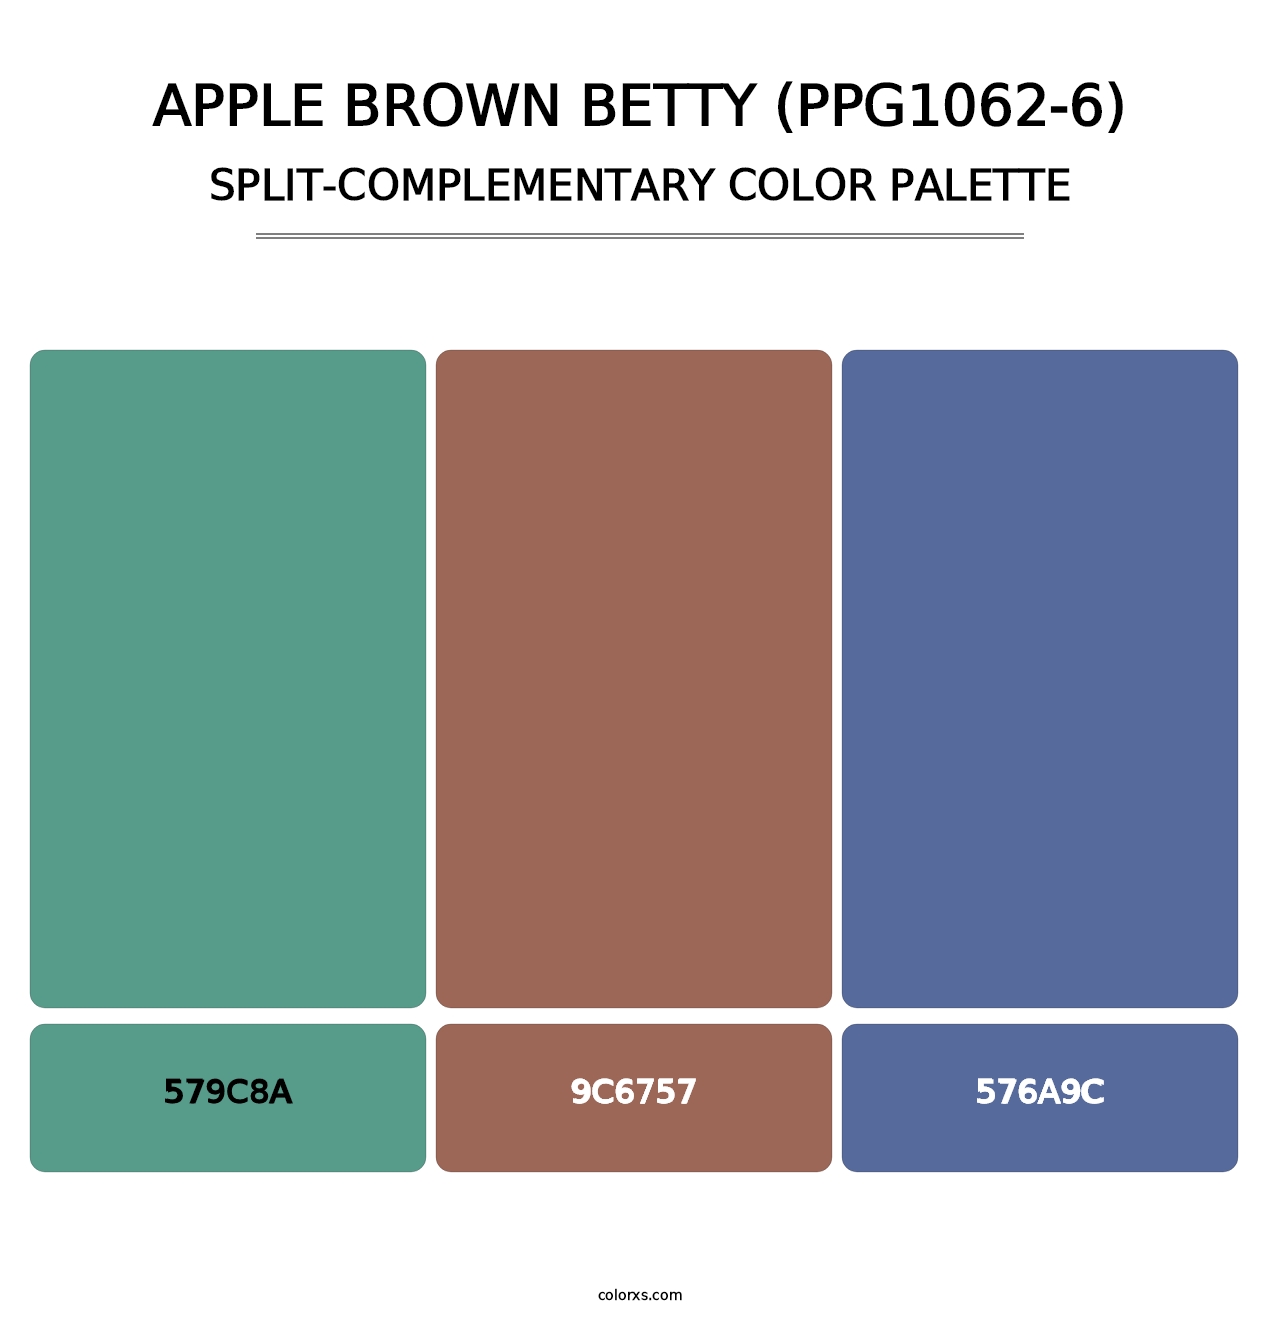 Apple Brown Betty (PPG1062-6) - Split-Complementary Color Palette